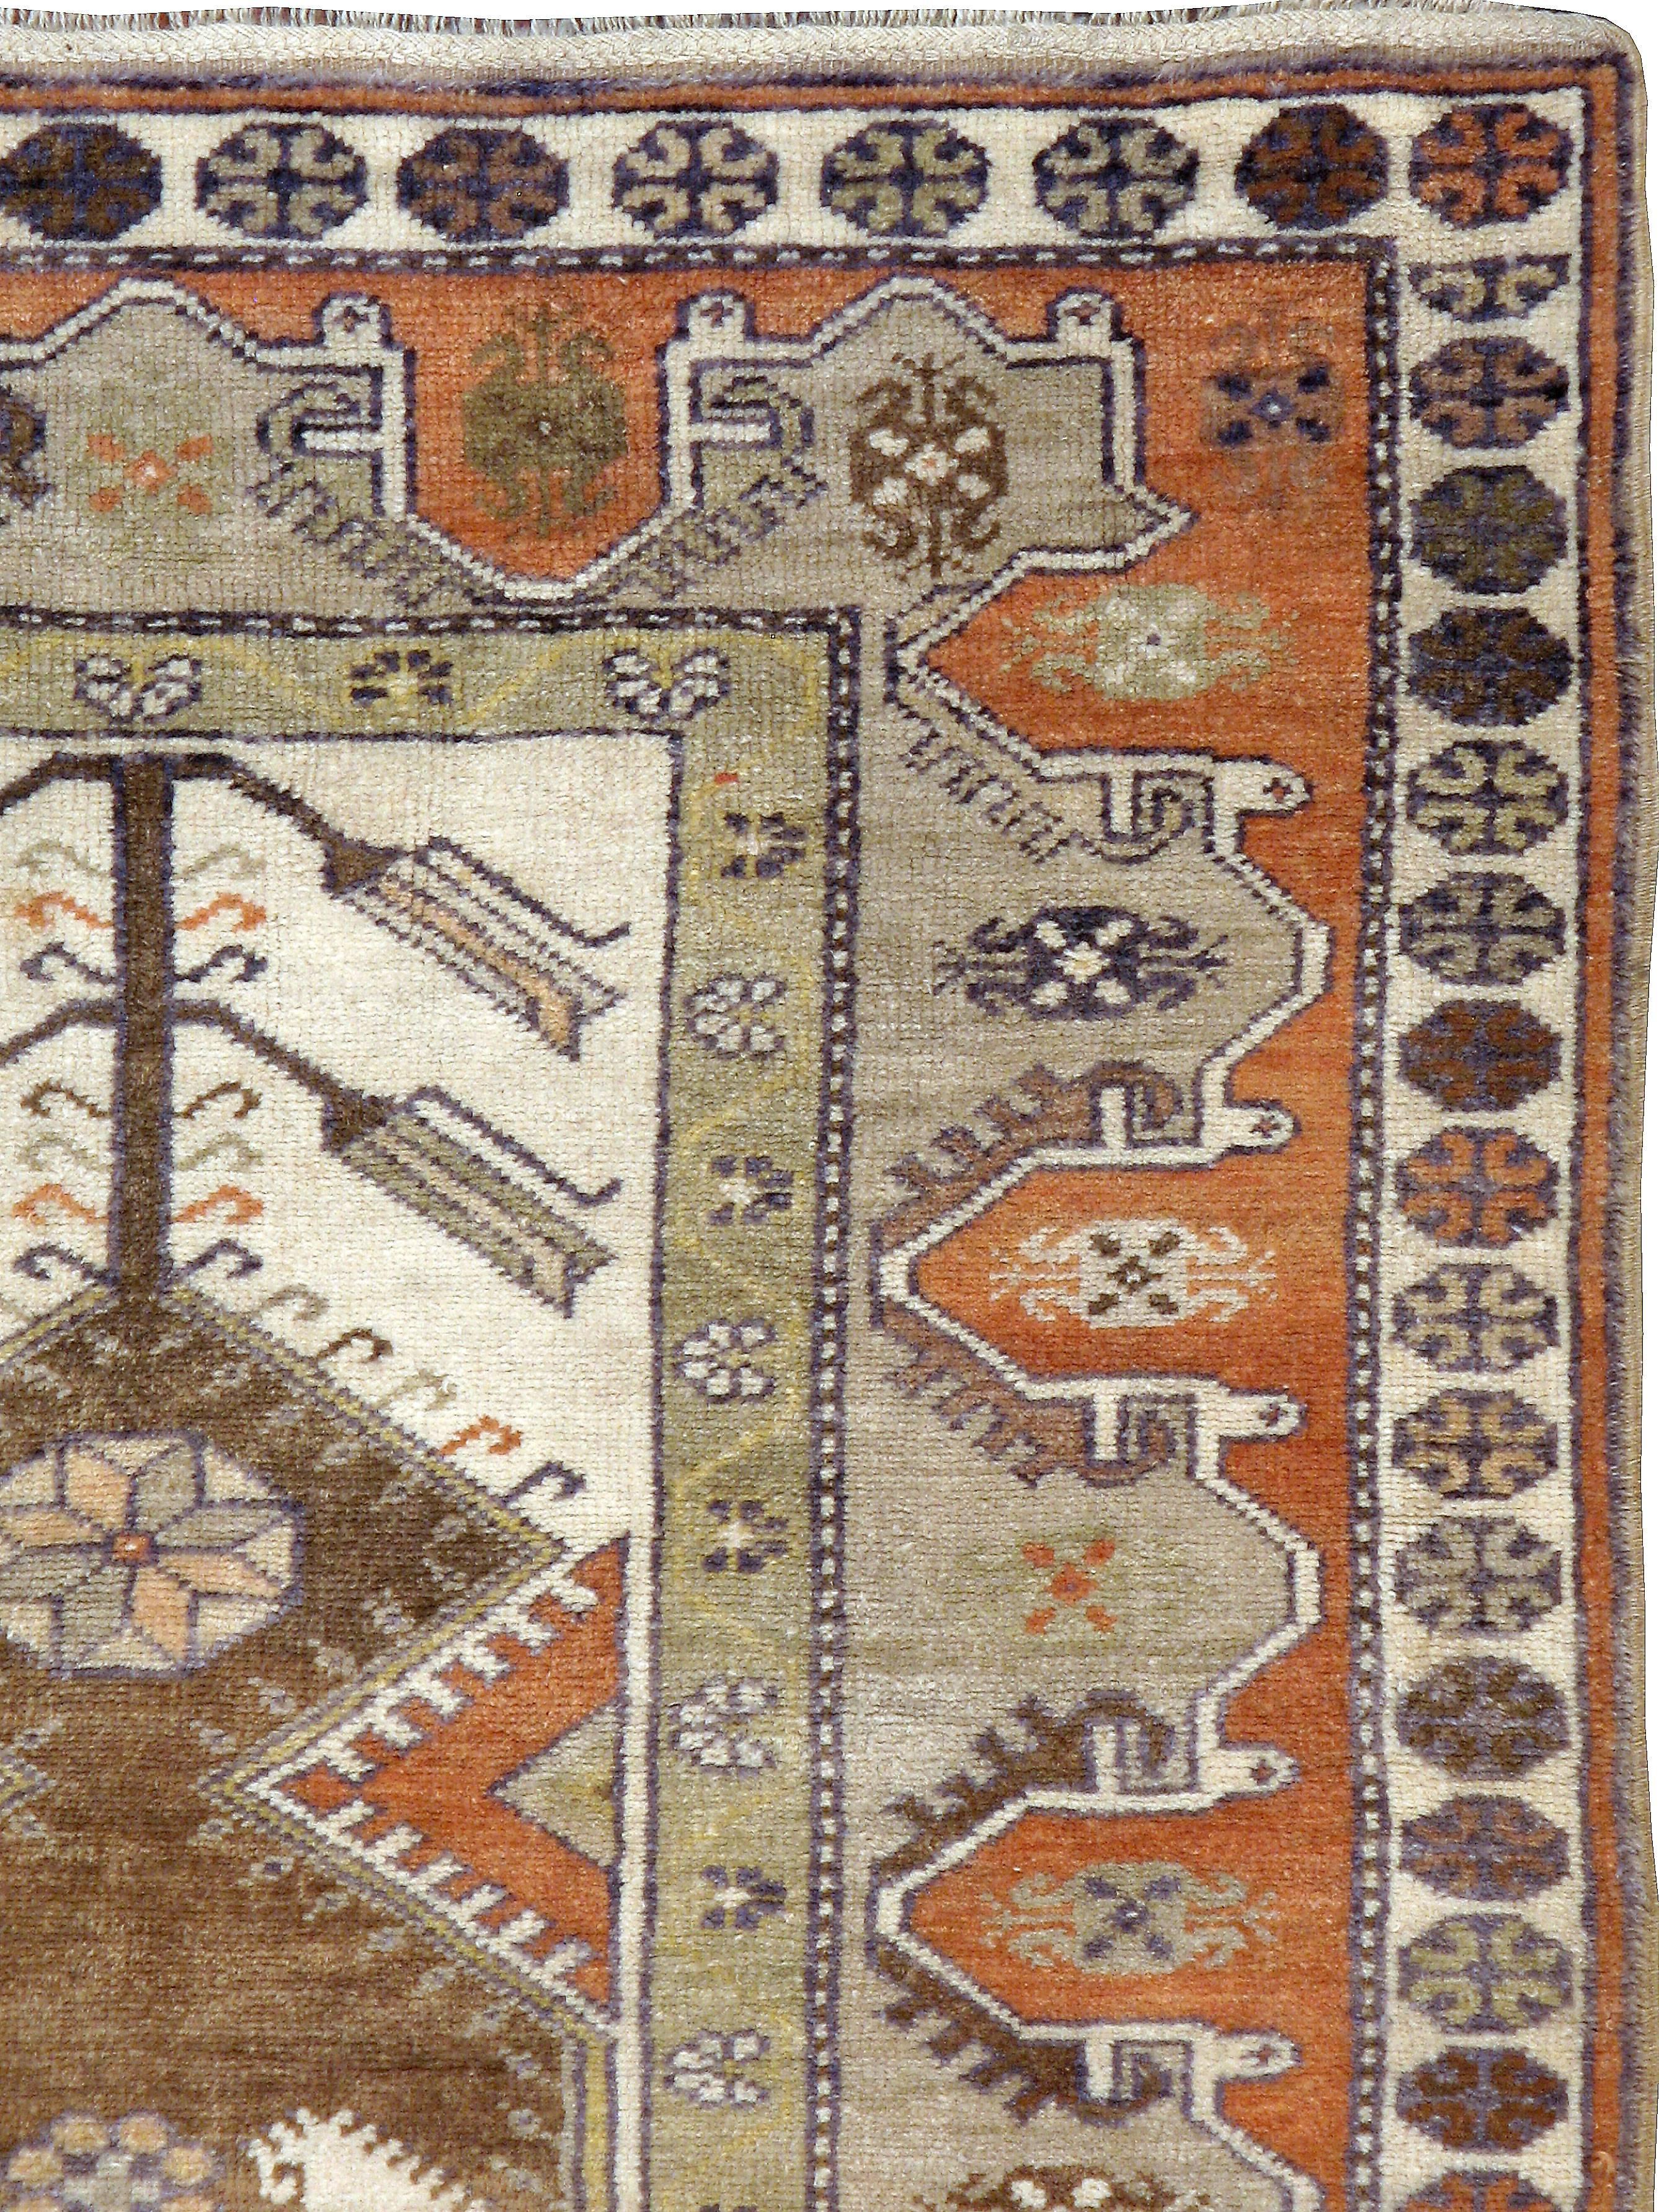 A vintage Turkish Oushak carpet from the mid-20th century.